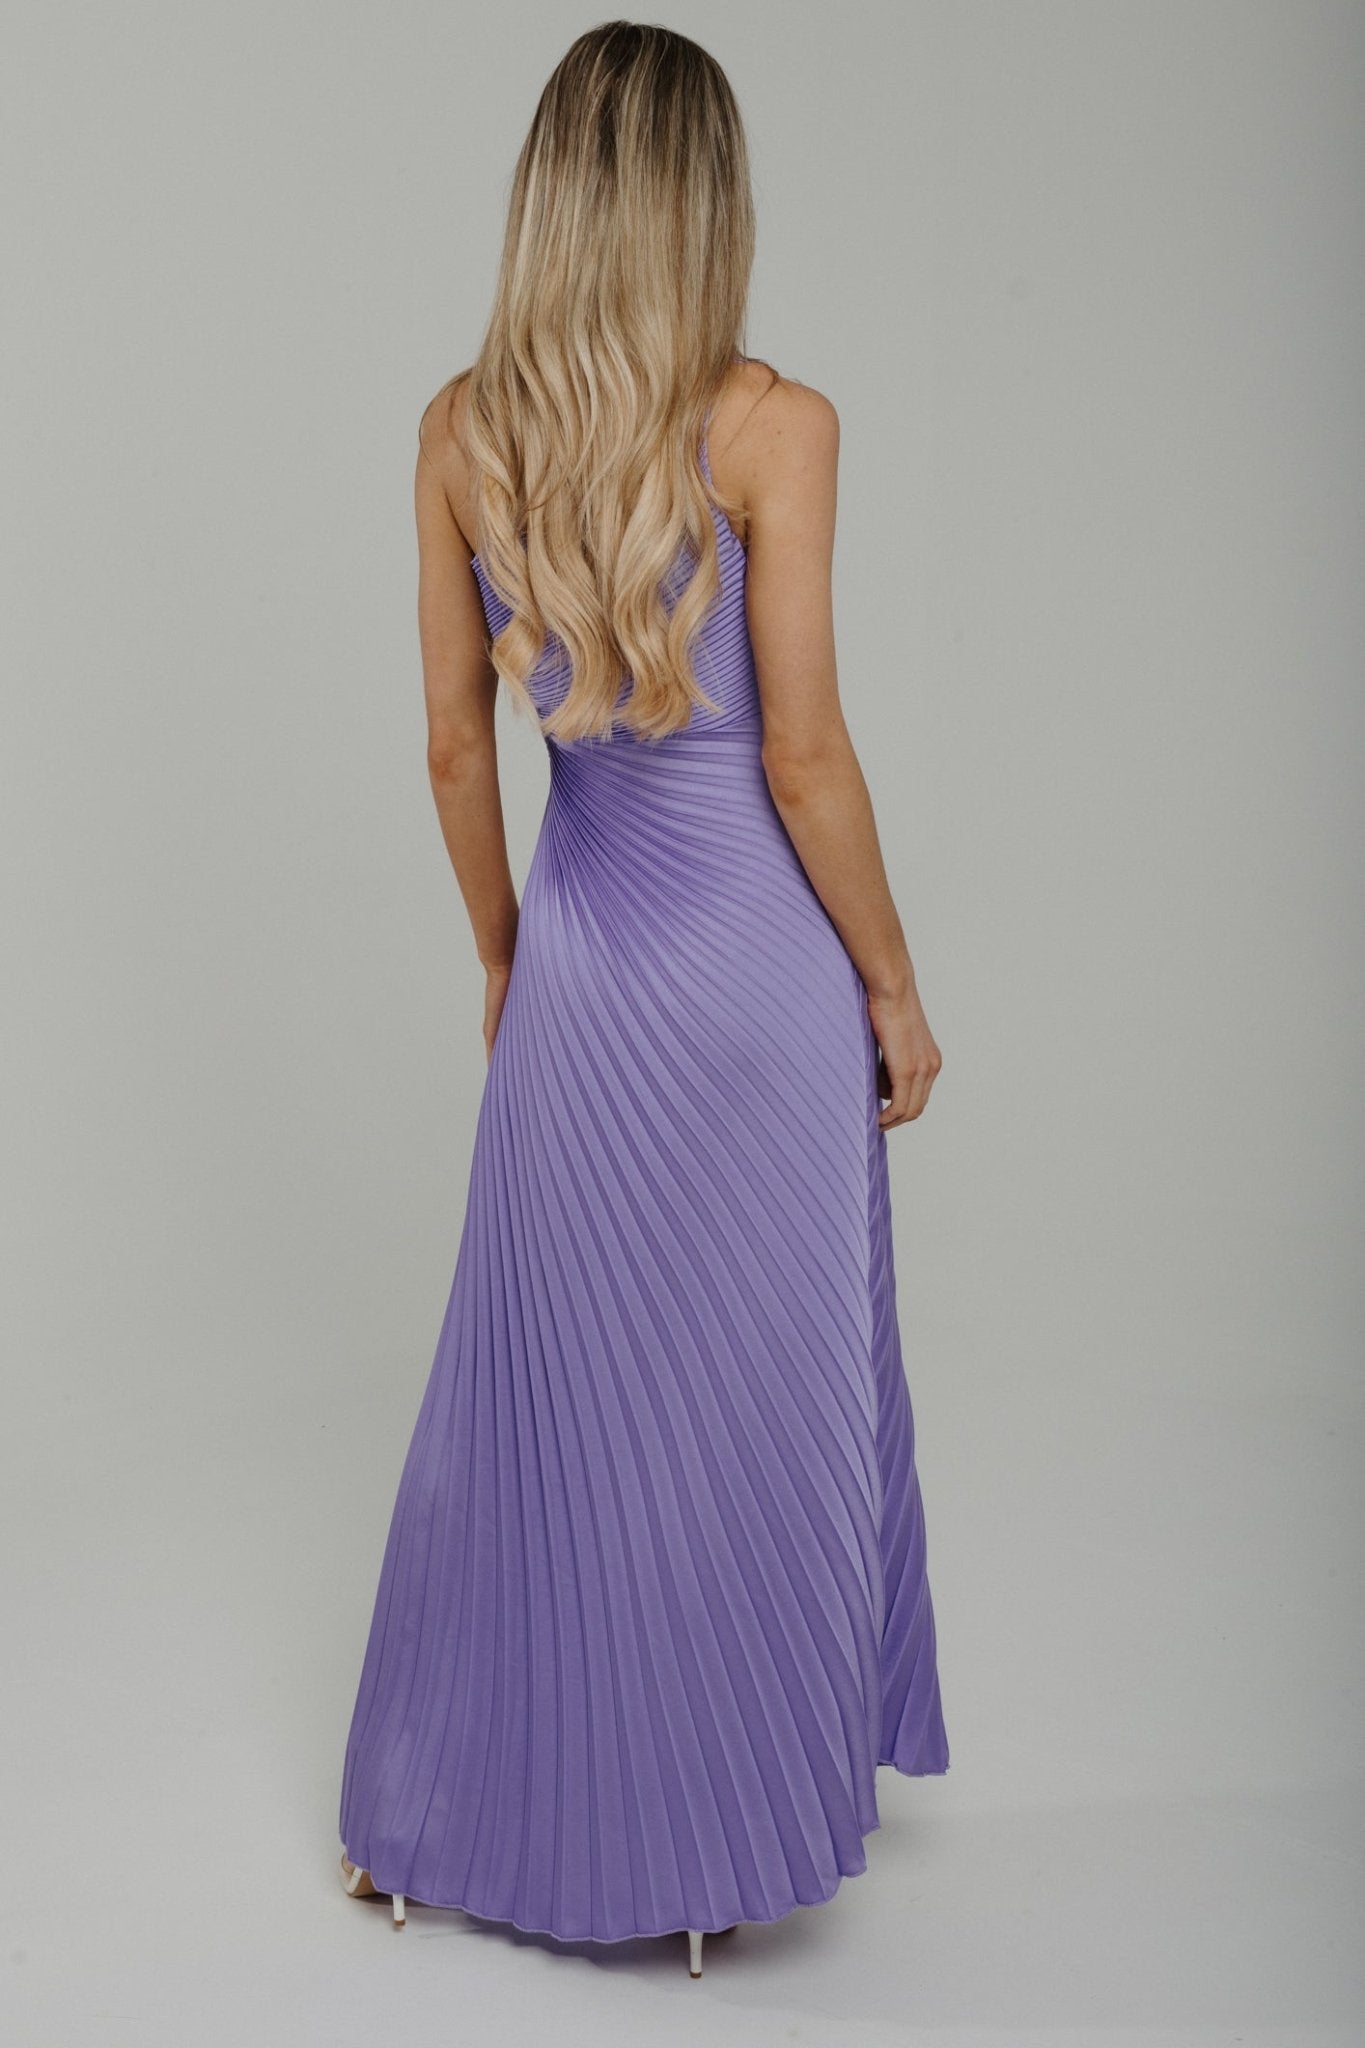 Indie One Shoulder Pleated Maxi Dress In Lilac - The Walk in Wardrobe